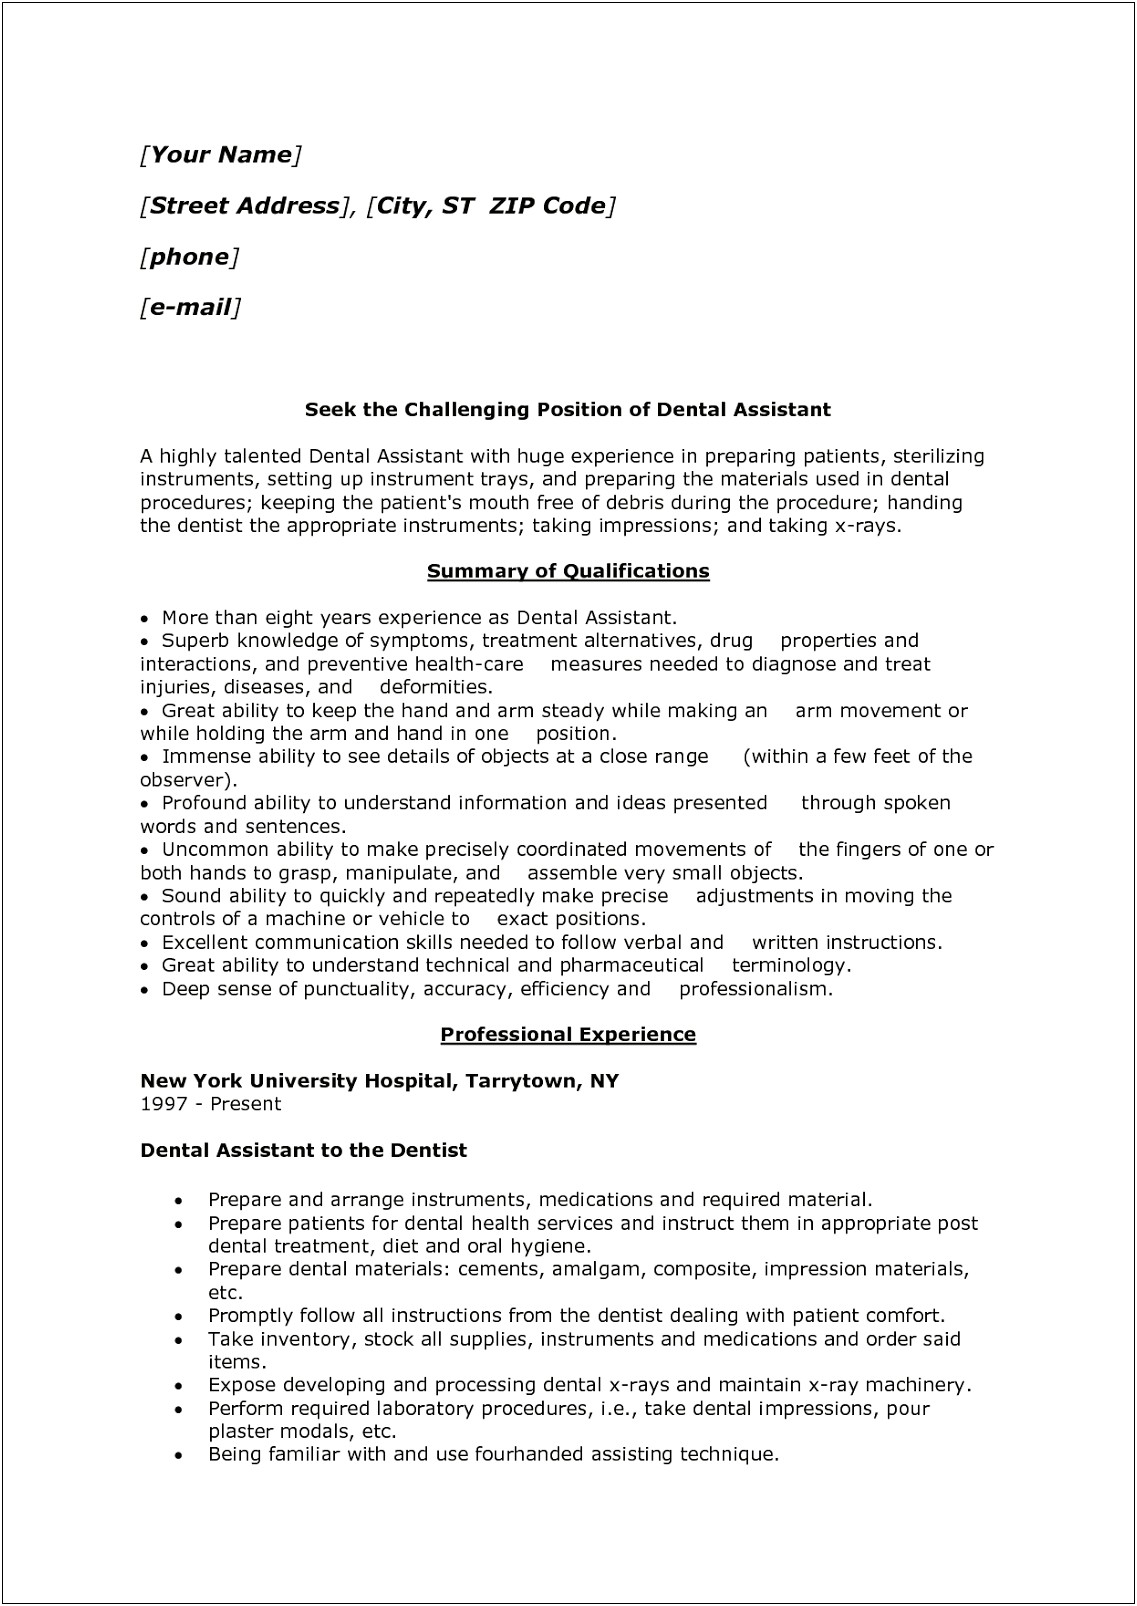 Professional Profile Resume Template Dental Assistant